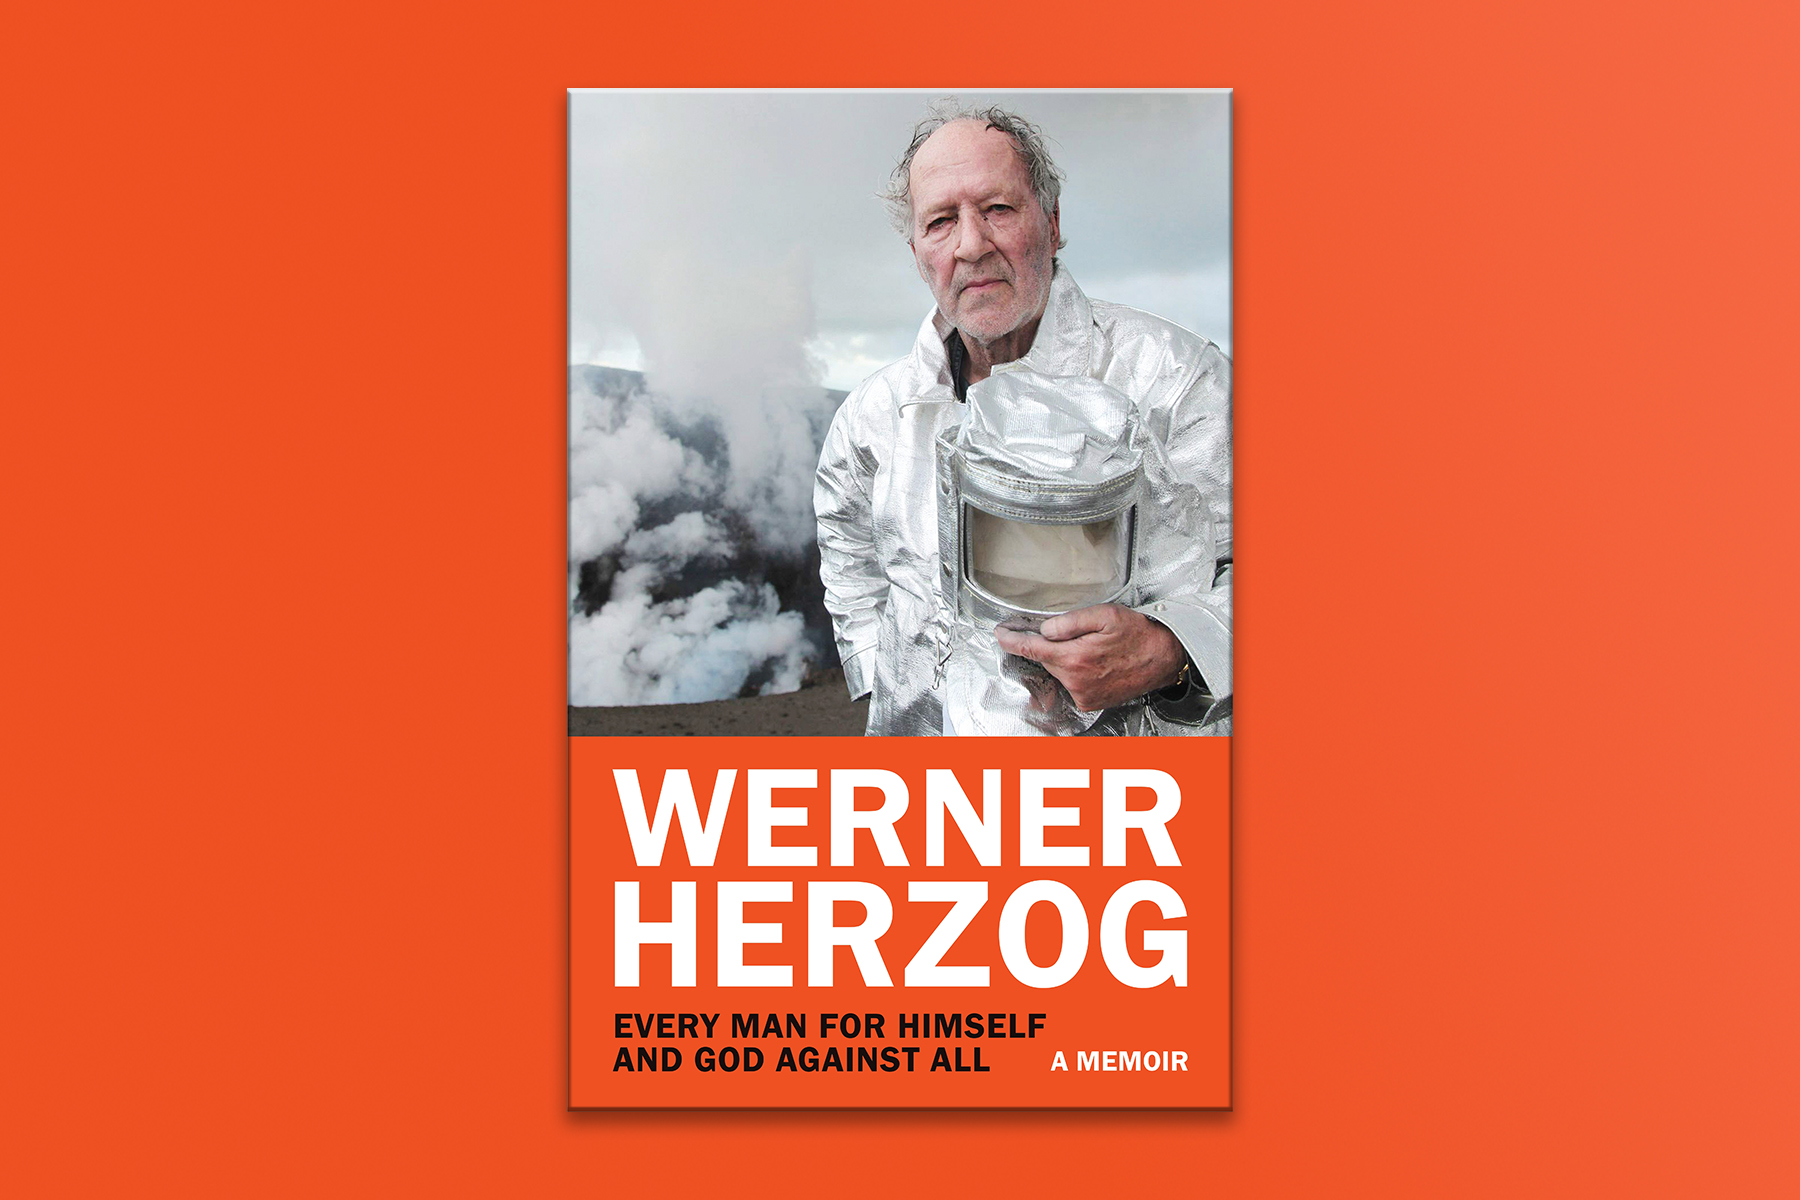 Book, Every Man for Himself and God Against All by Werner Herzog, against an orange background